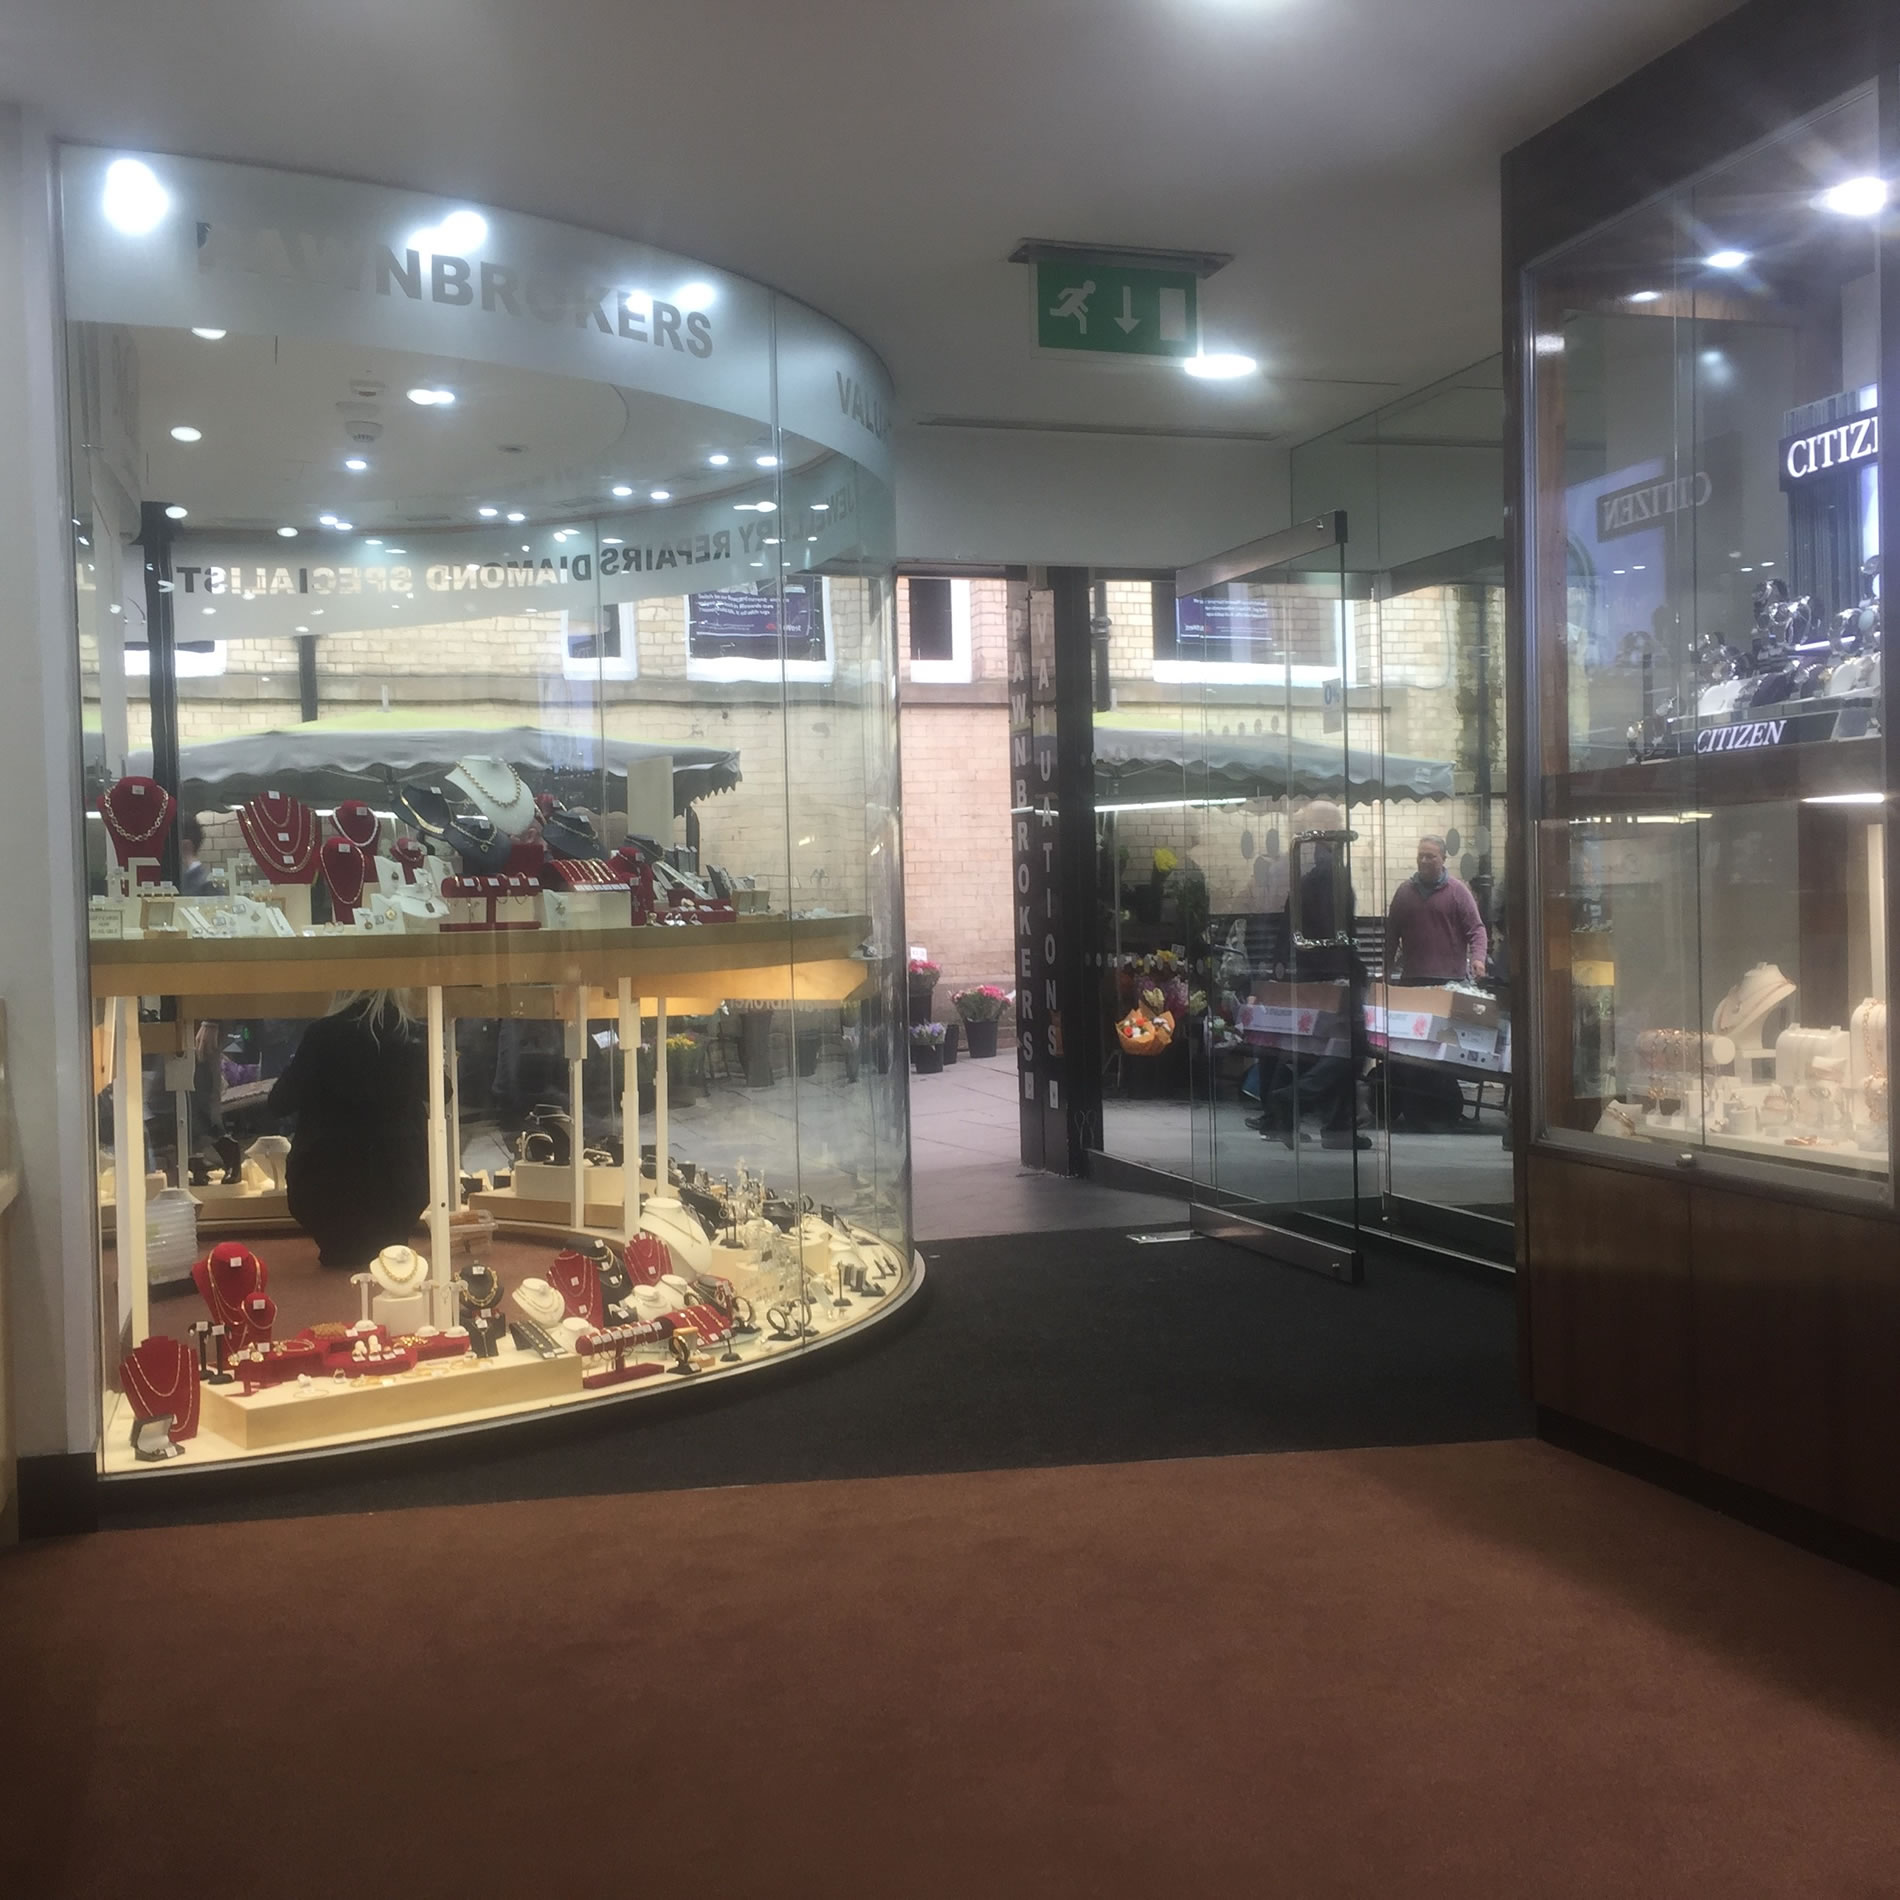 Mallards jewellers and pawnbrokers. Quality bespoke shopfitting  in a traditional style.